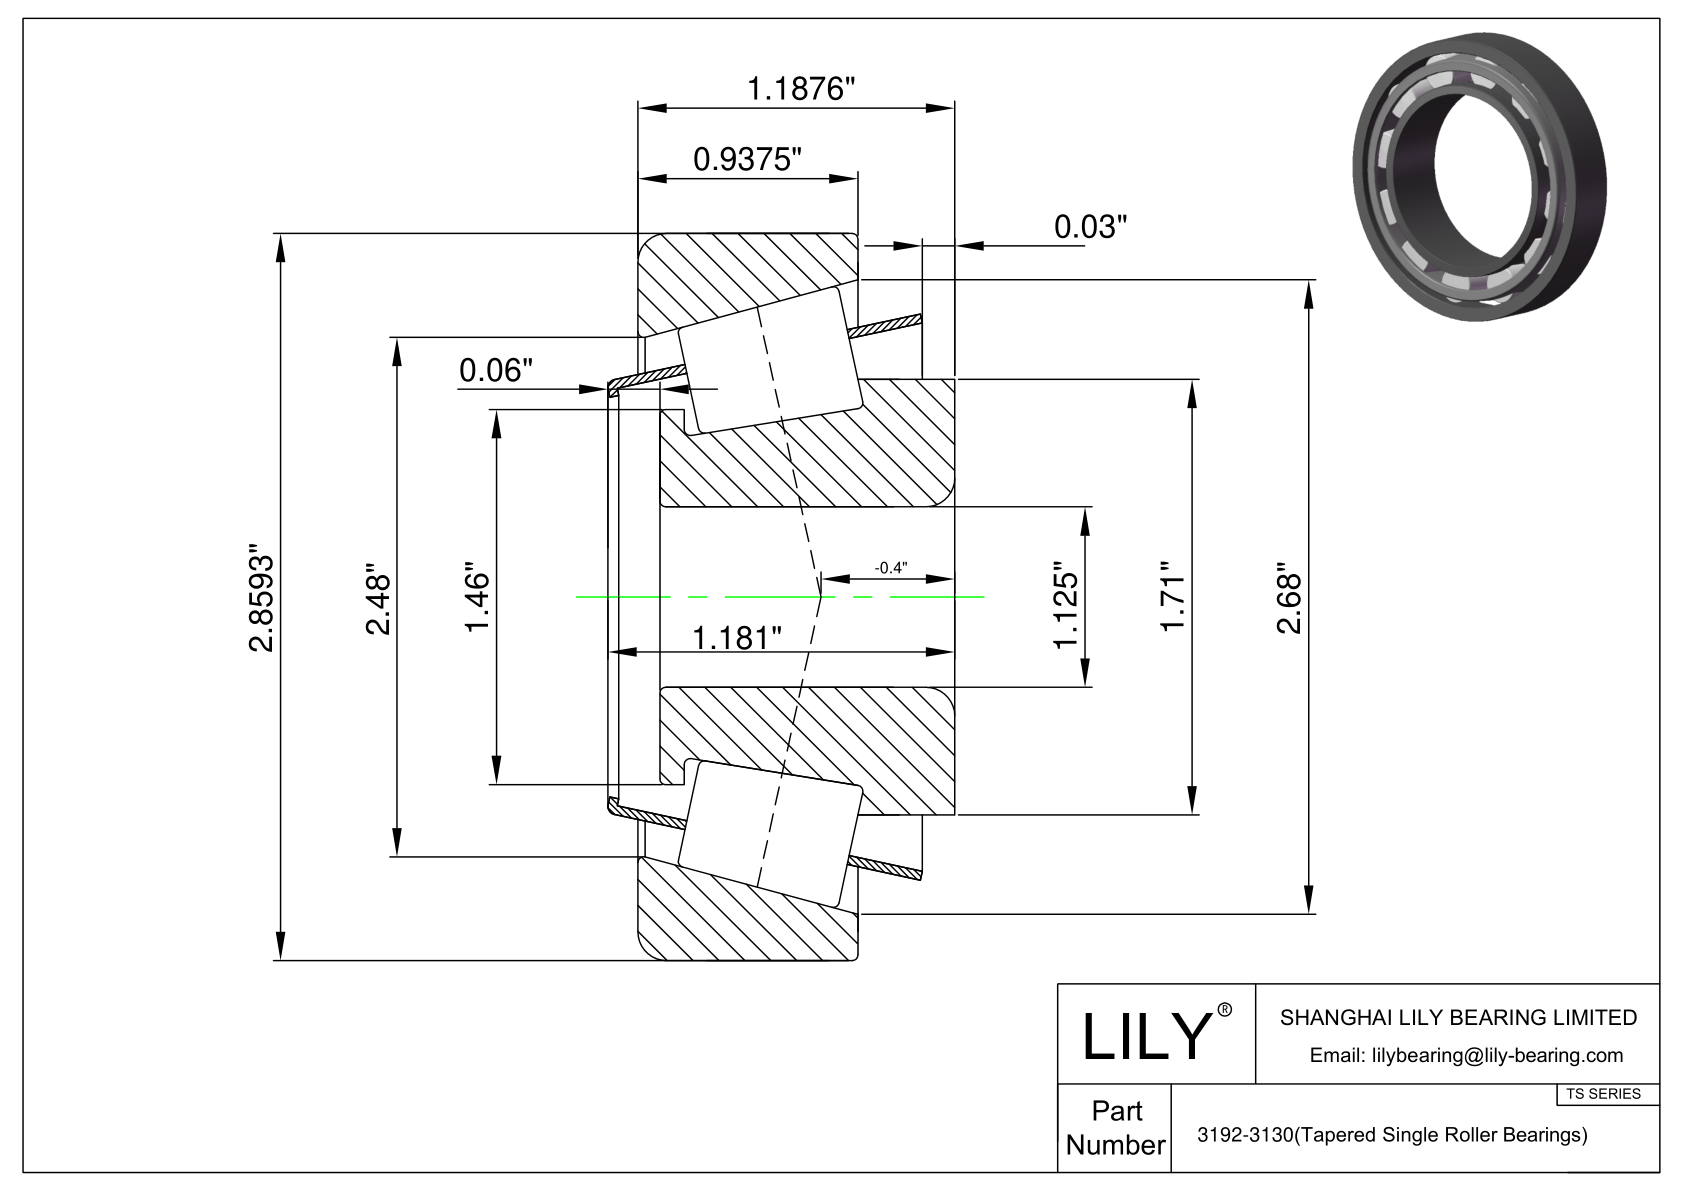 3192-3130 TS (Tapered Single Roller Bearings) (Imperial) cad drawing